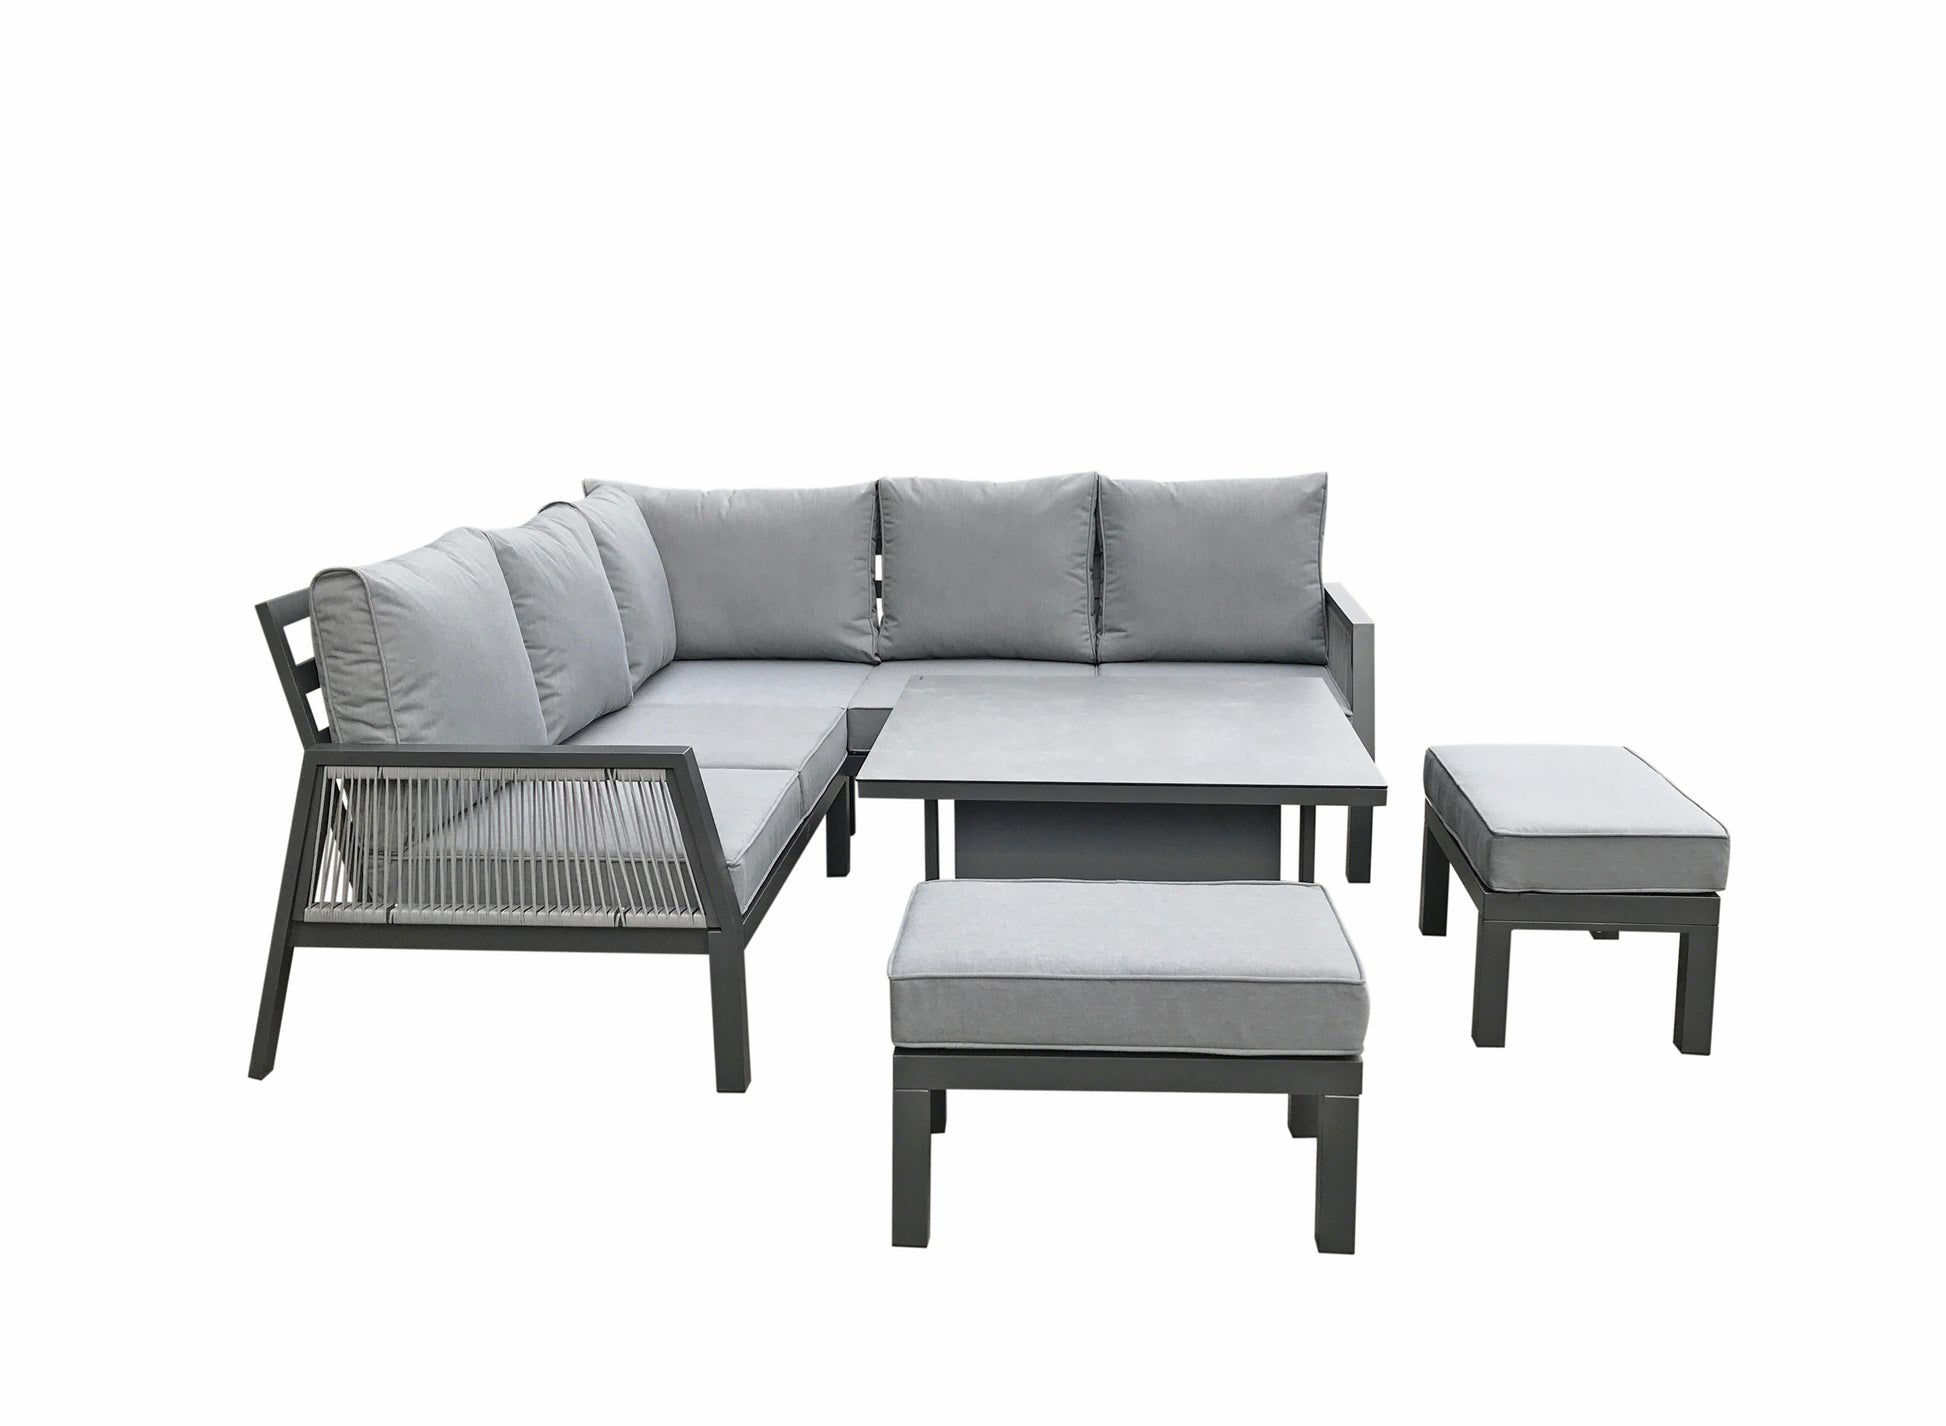 Signature Weave - Bettina corner sofa with 2 benches in Grey powder coat with gas lift table - Beyond outdoor living